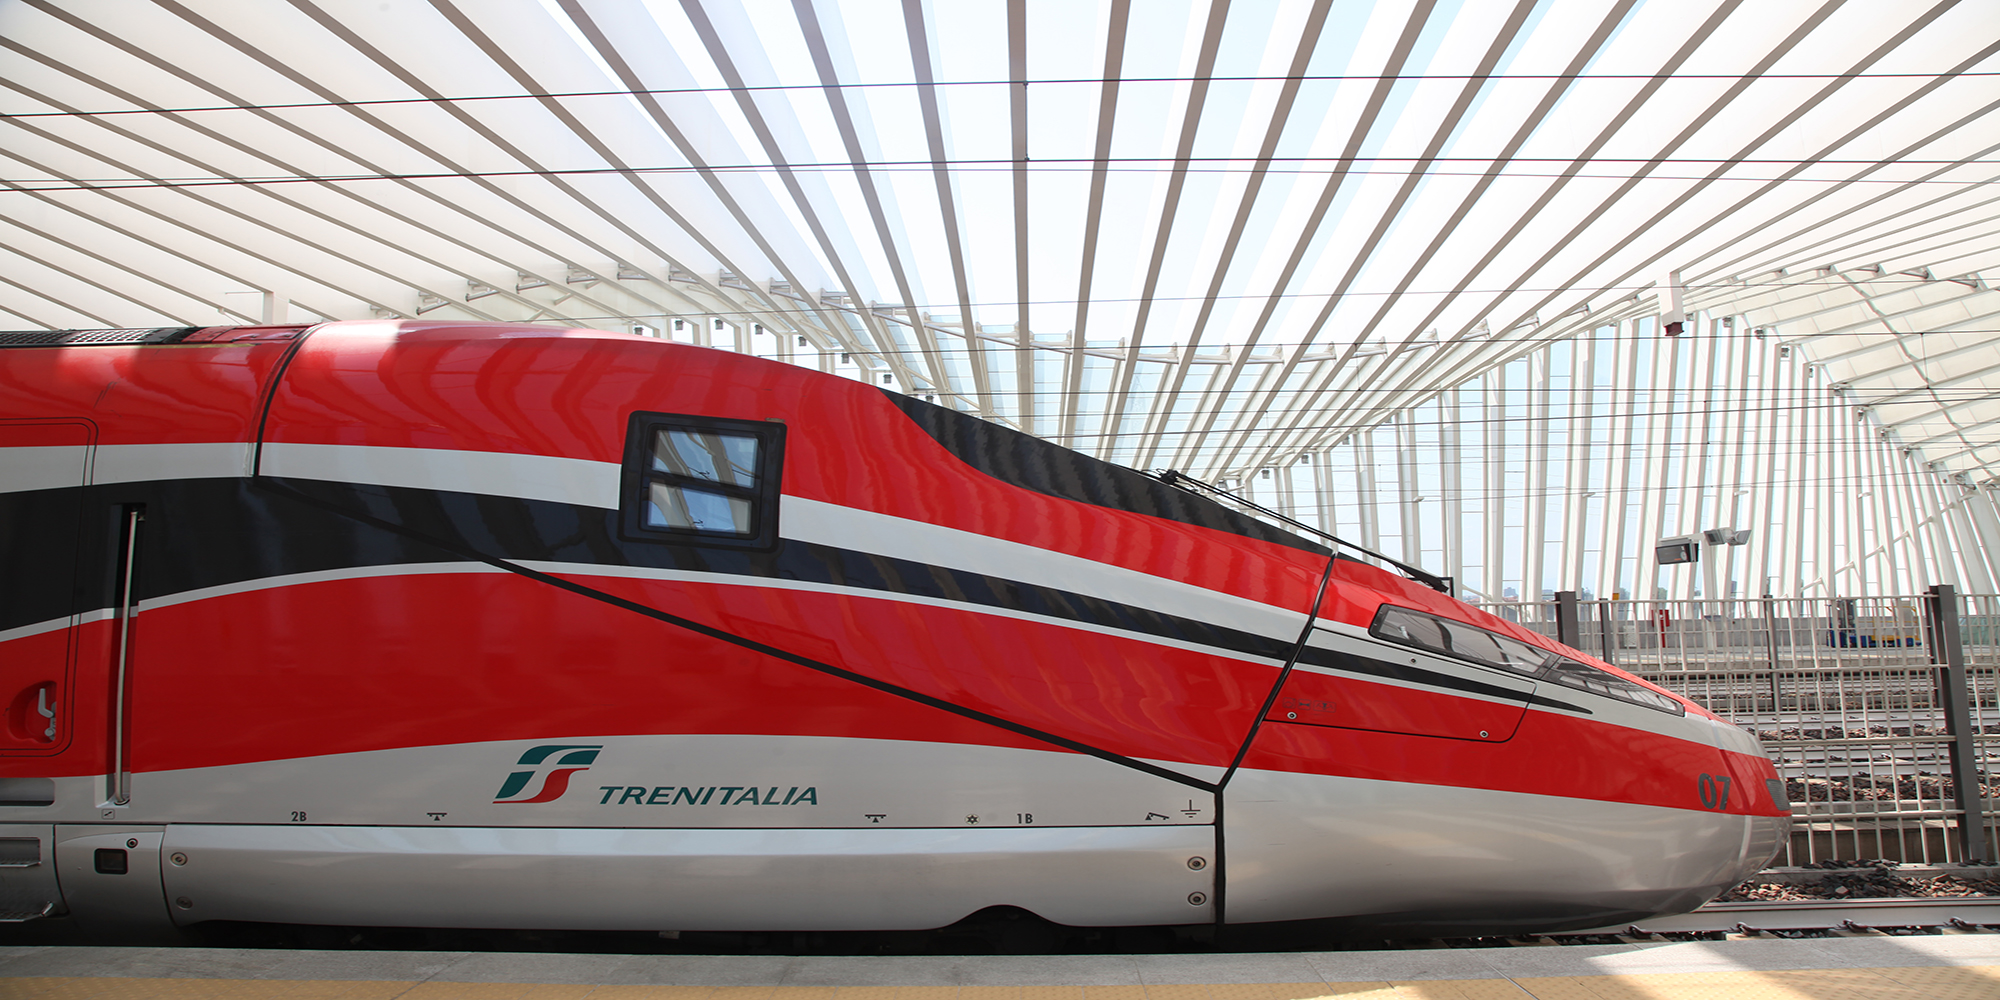 ParkCloud on the Right Track for Trenitalia Customers